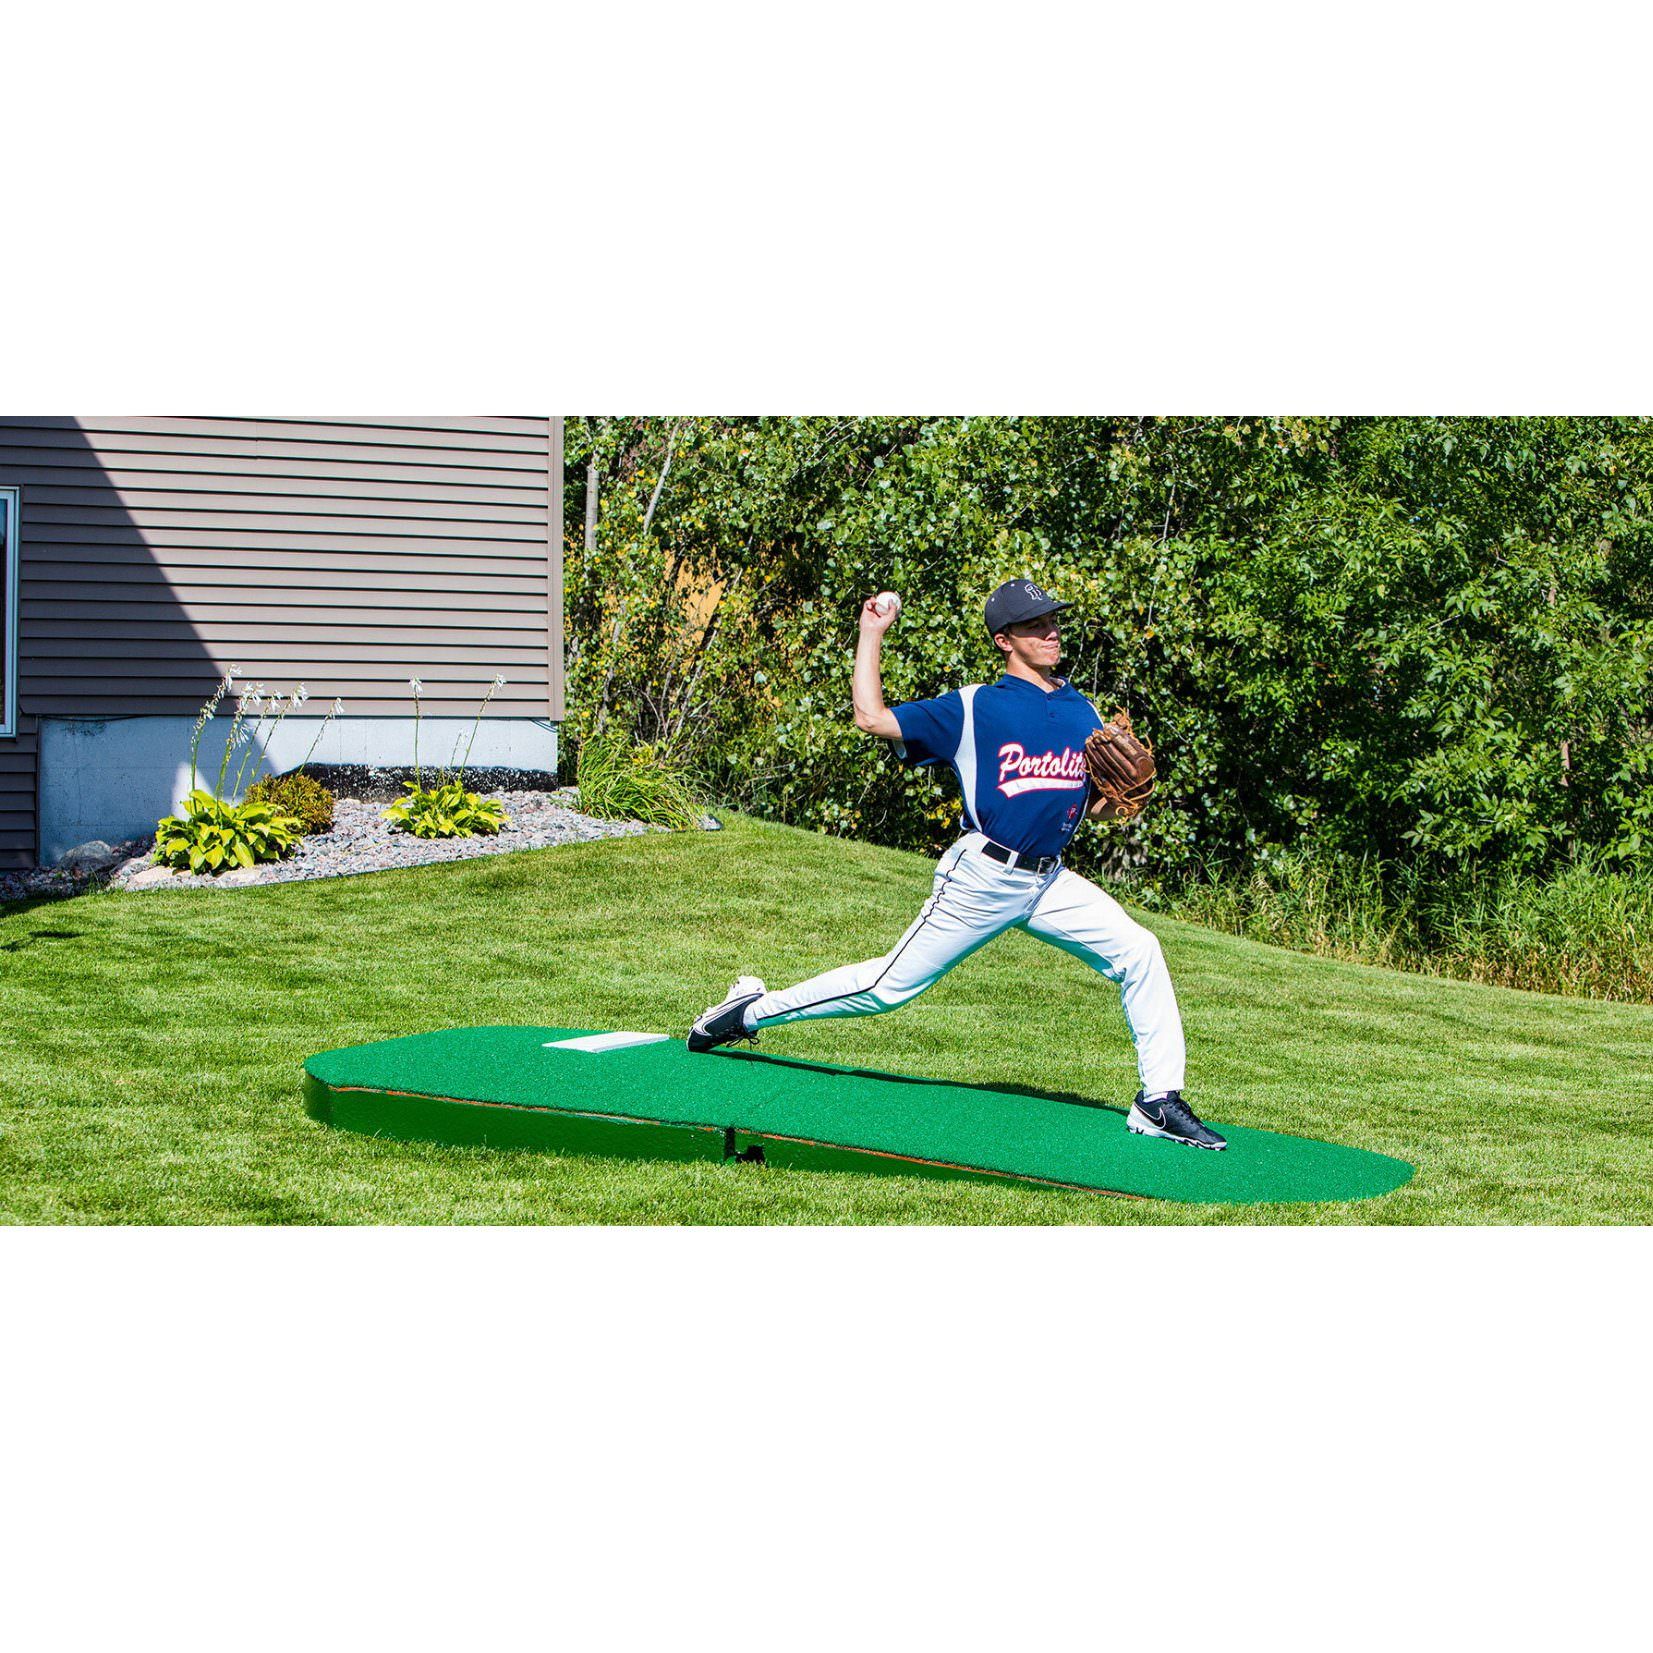 Portolite 10" Full Size 2-Piece Portable Practice Pitching Mound green side view pitcher stride